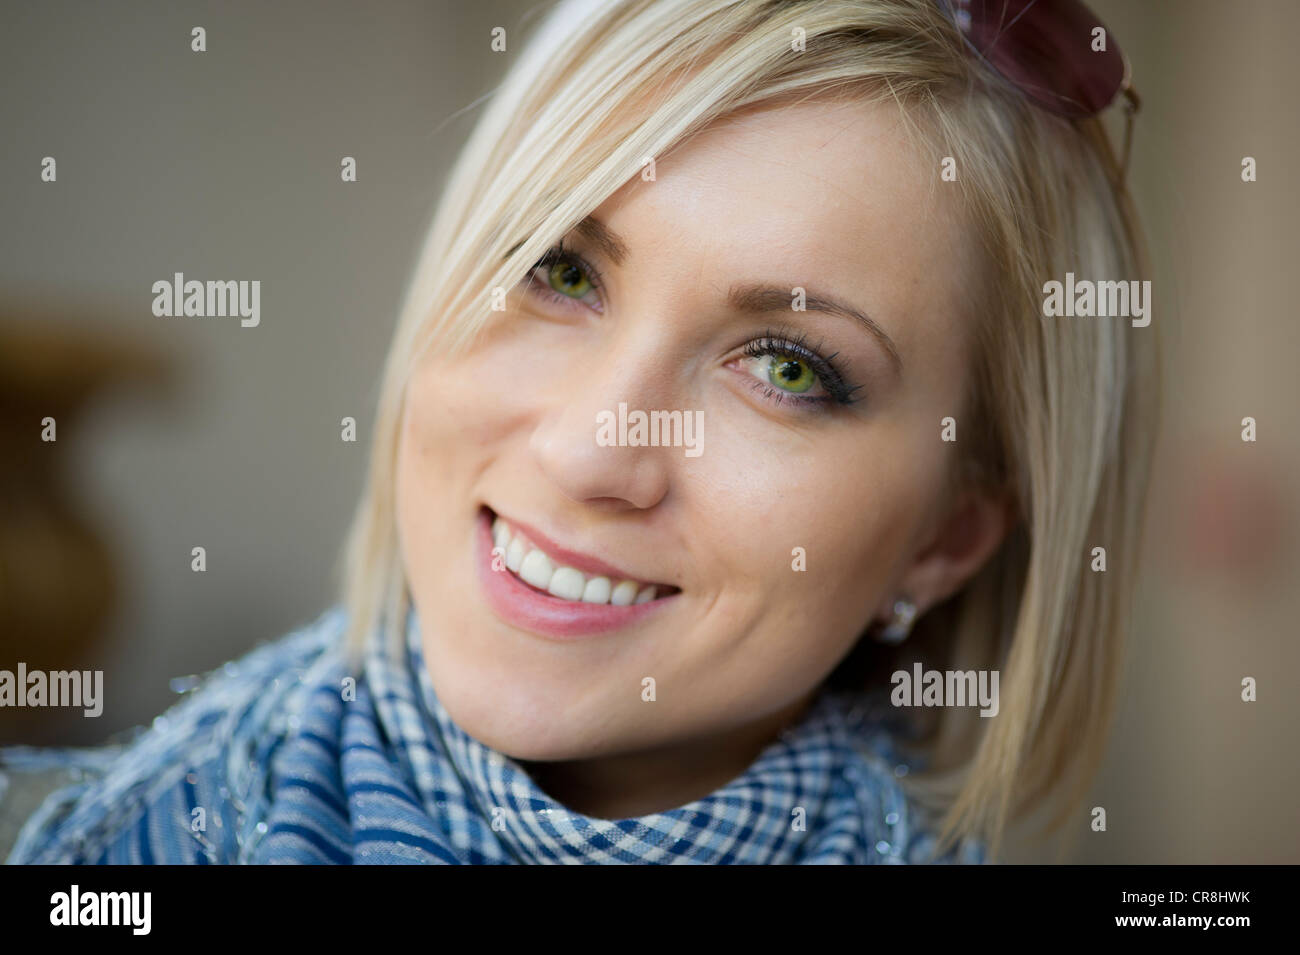 Blonde woman with green eyes Stock Photo